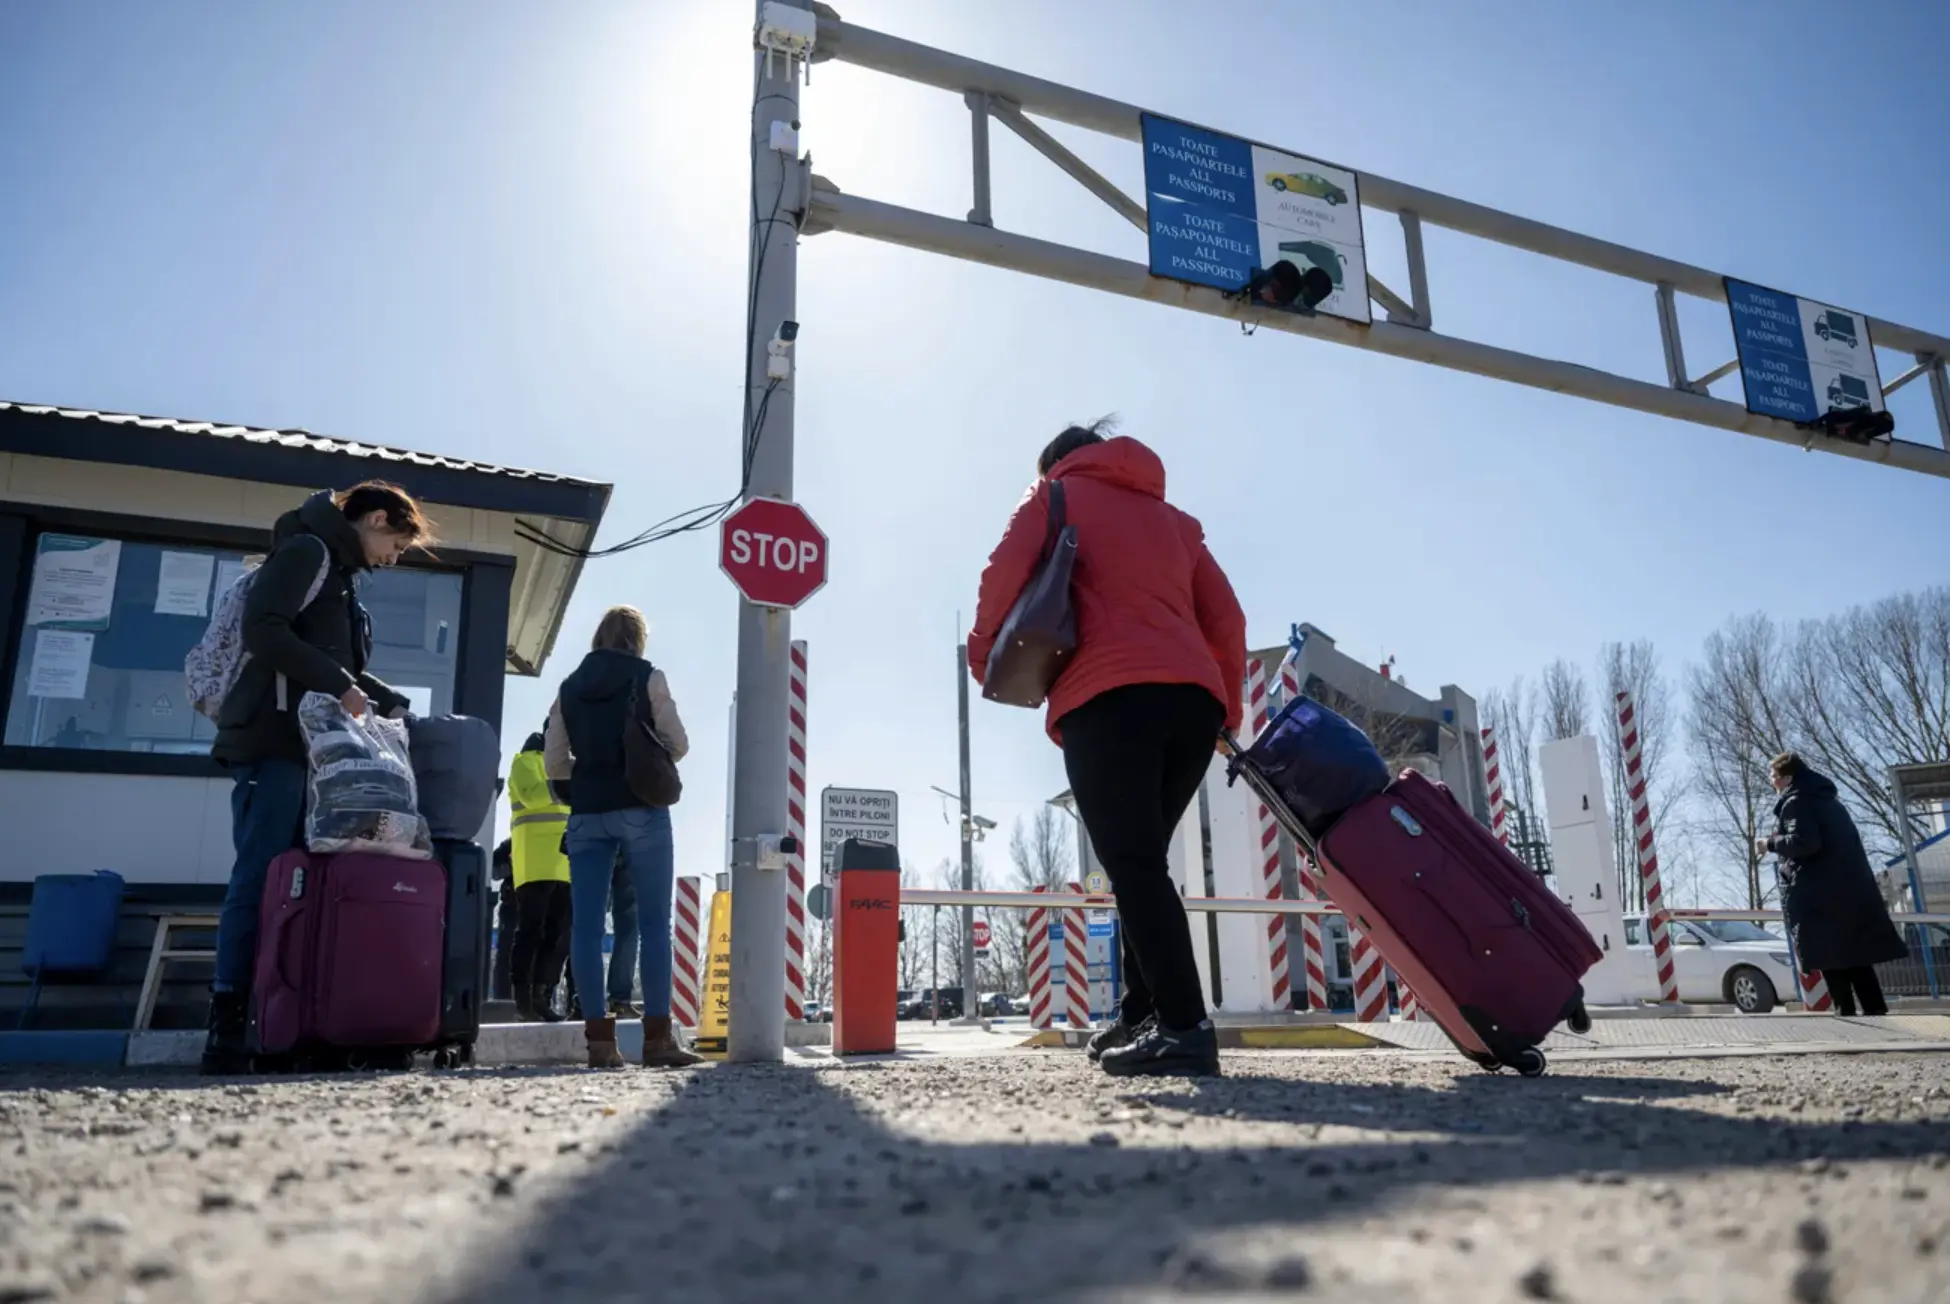 a family returns to Ukraine with luggage at the border crossing